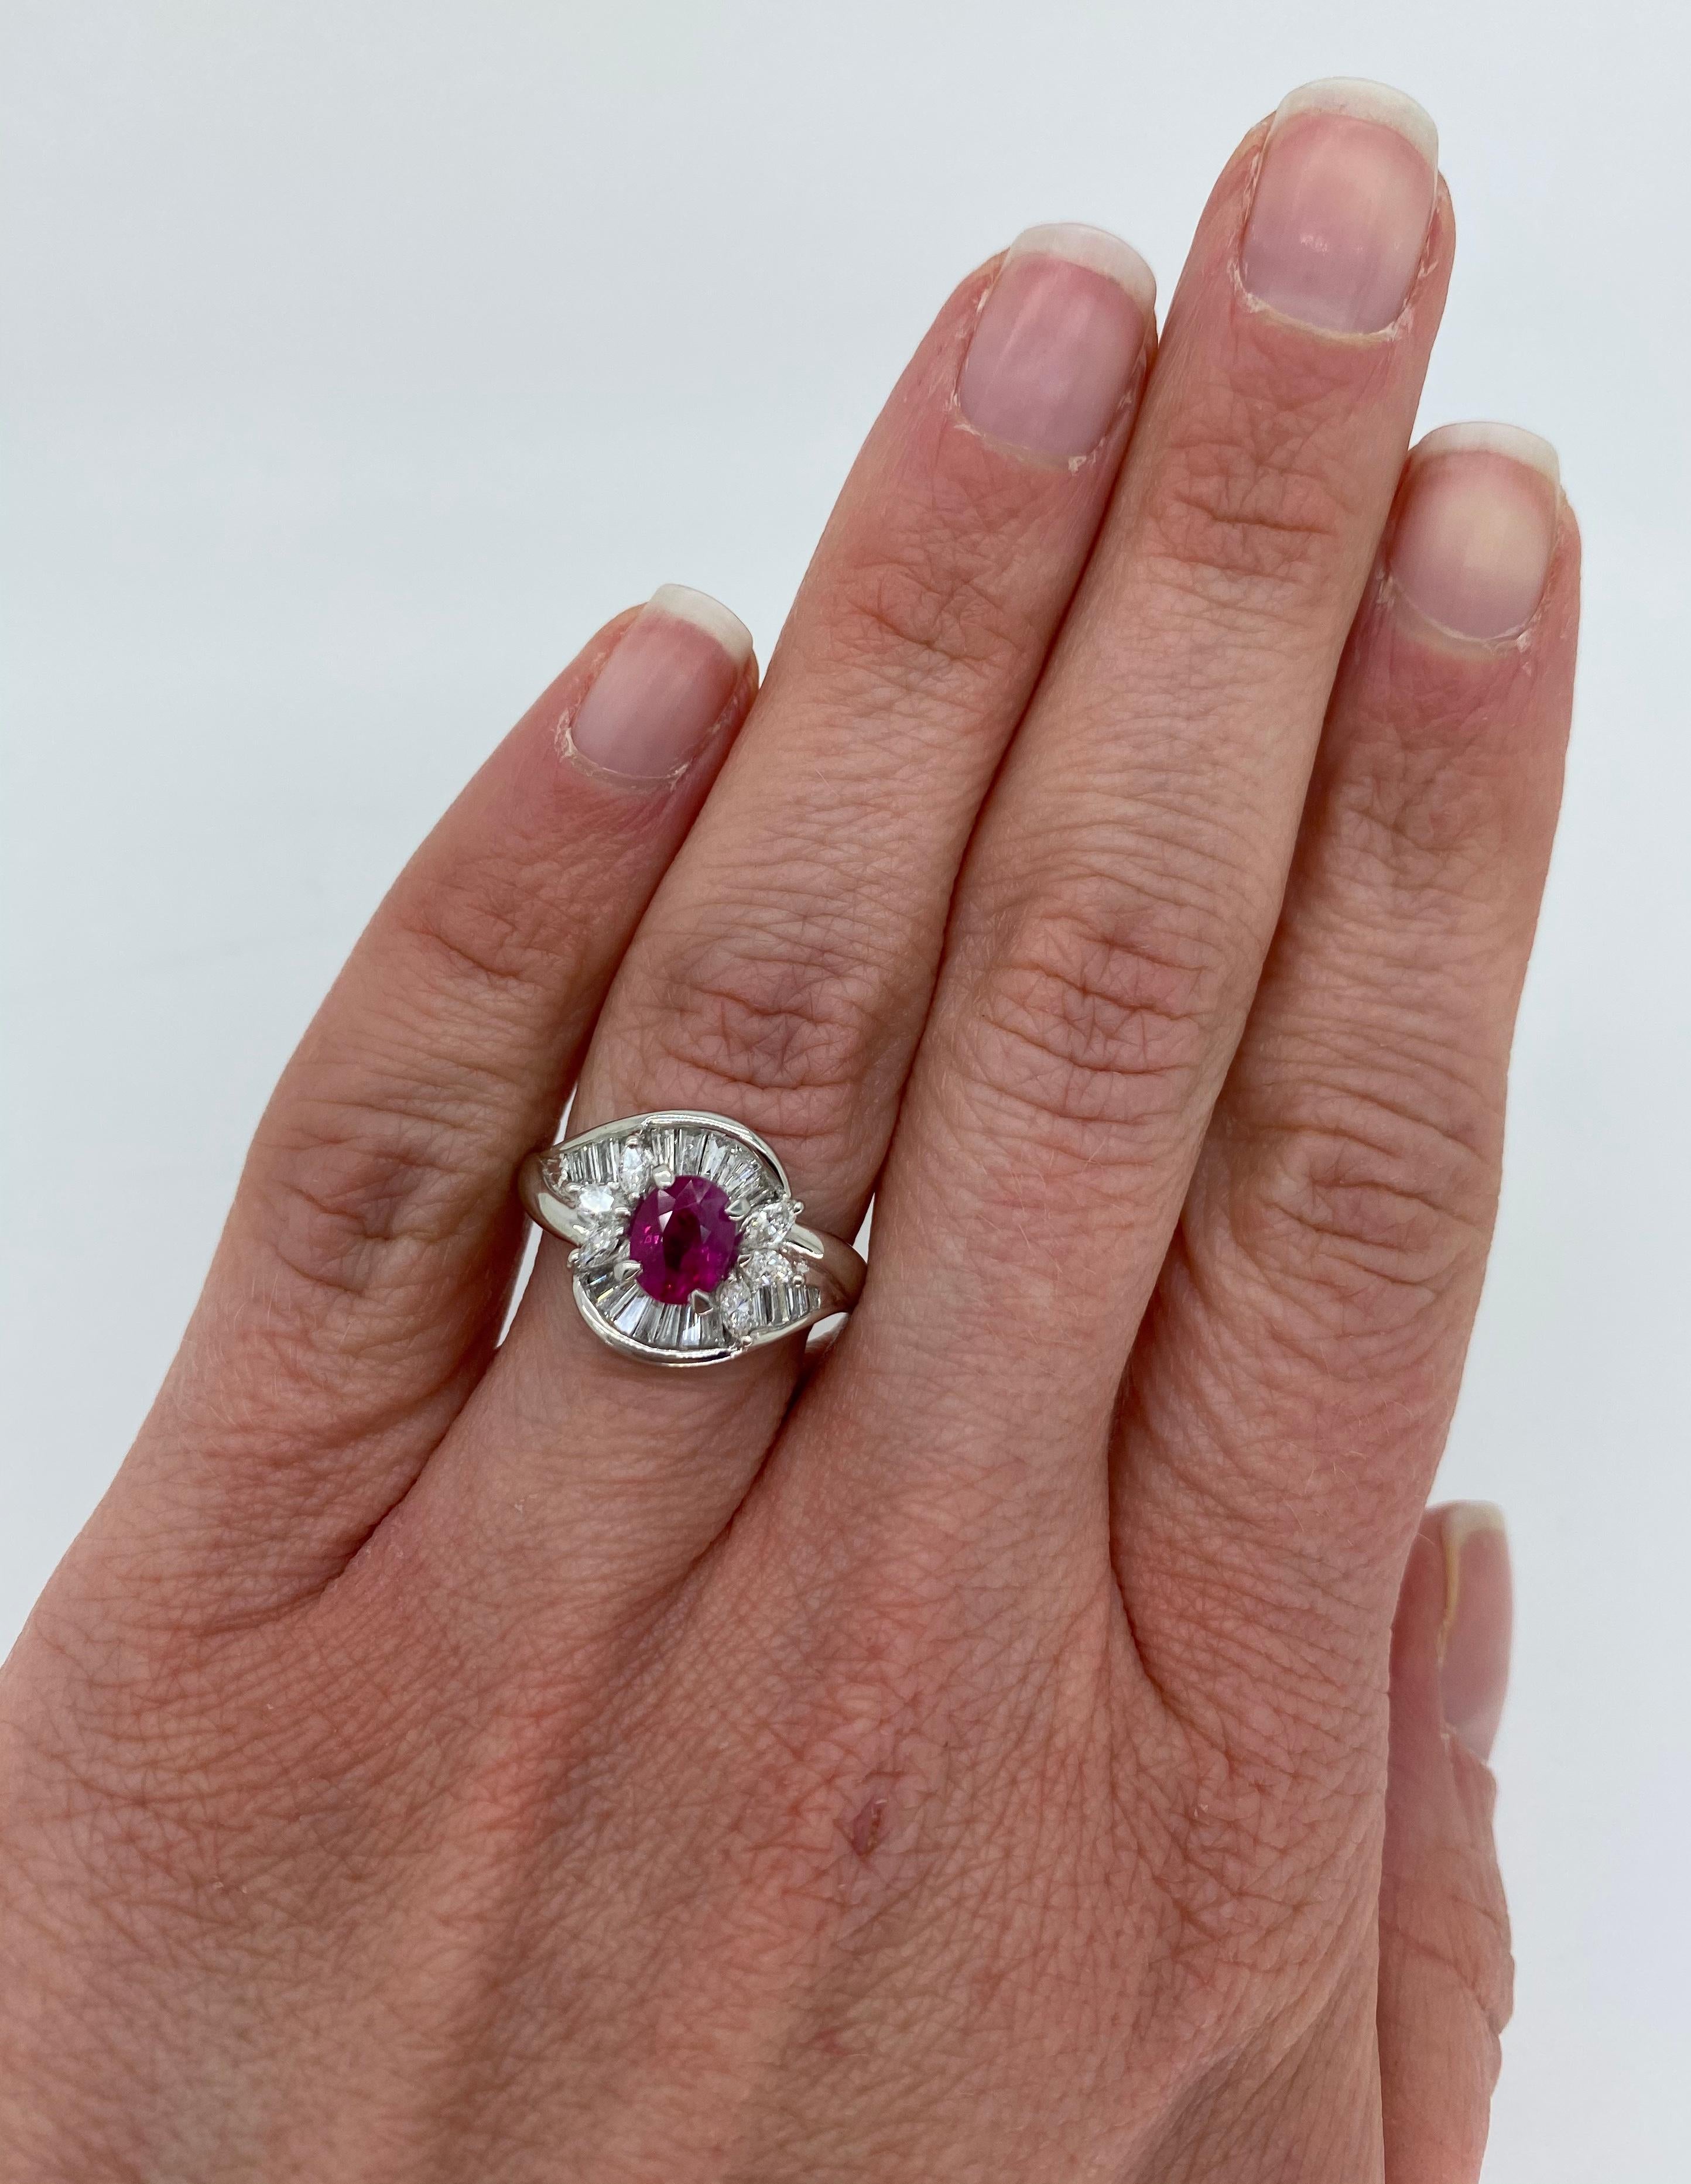 Cross over halo style Diamond and Ruby cocktail ring crafted in platinum.

Gemstone: Ruby & Diamond
Gemstone Carat Weight: Oval Cut Approximately 1.08CT Ruby
Diamond Carat Weight: Approximately .45CTW 
Diamond Cut: Marquise Cut and Tapered Baguette